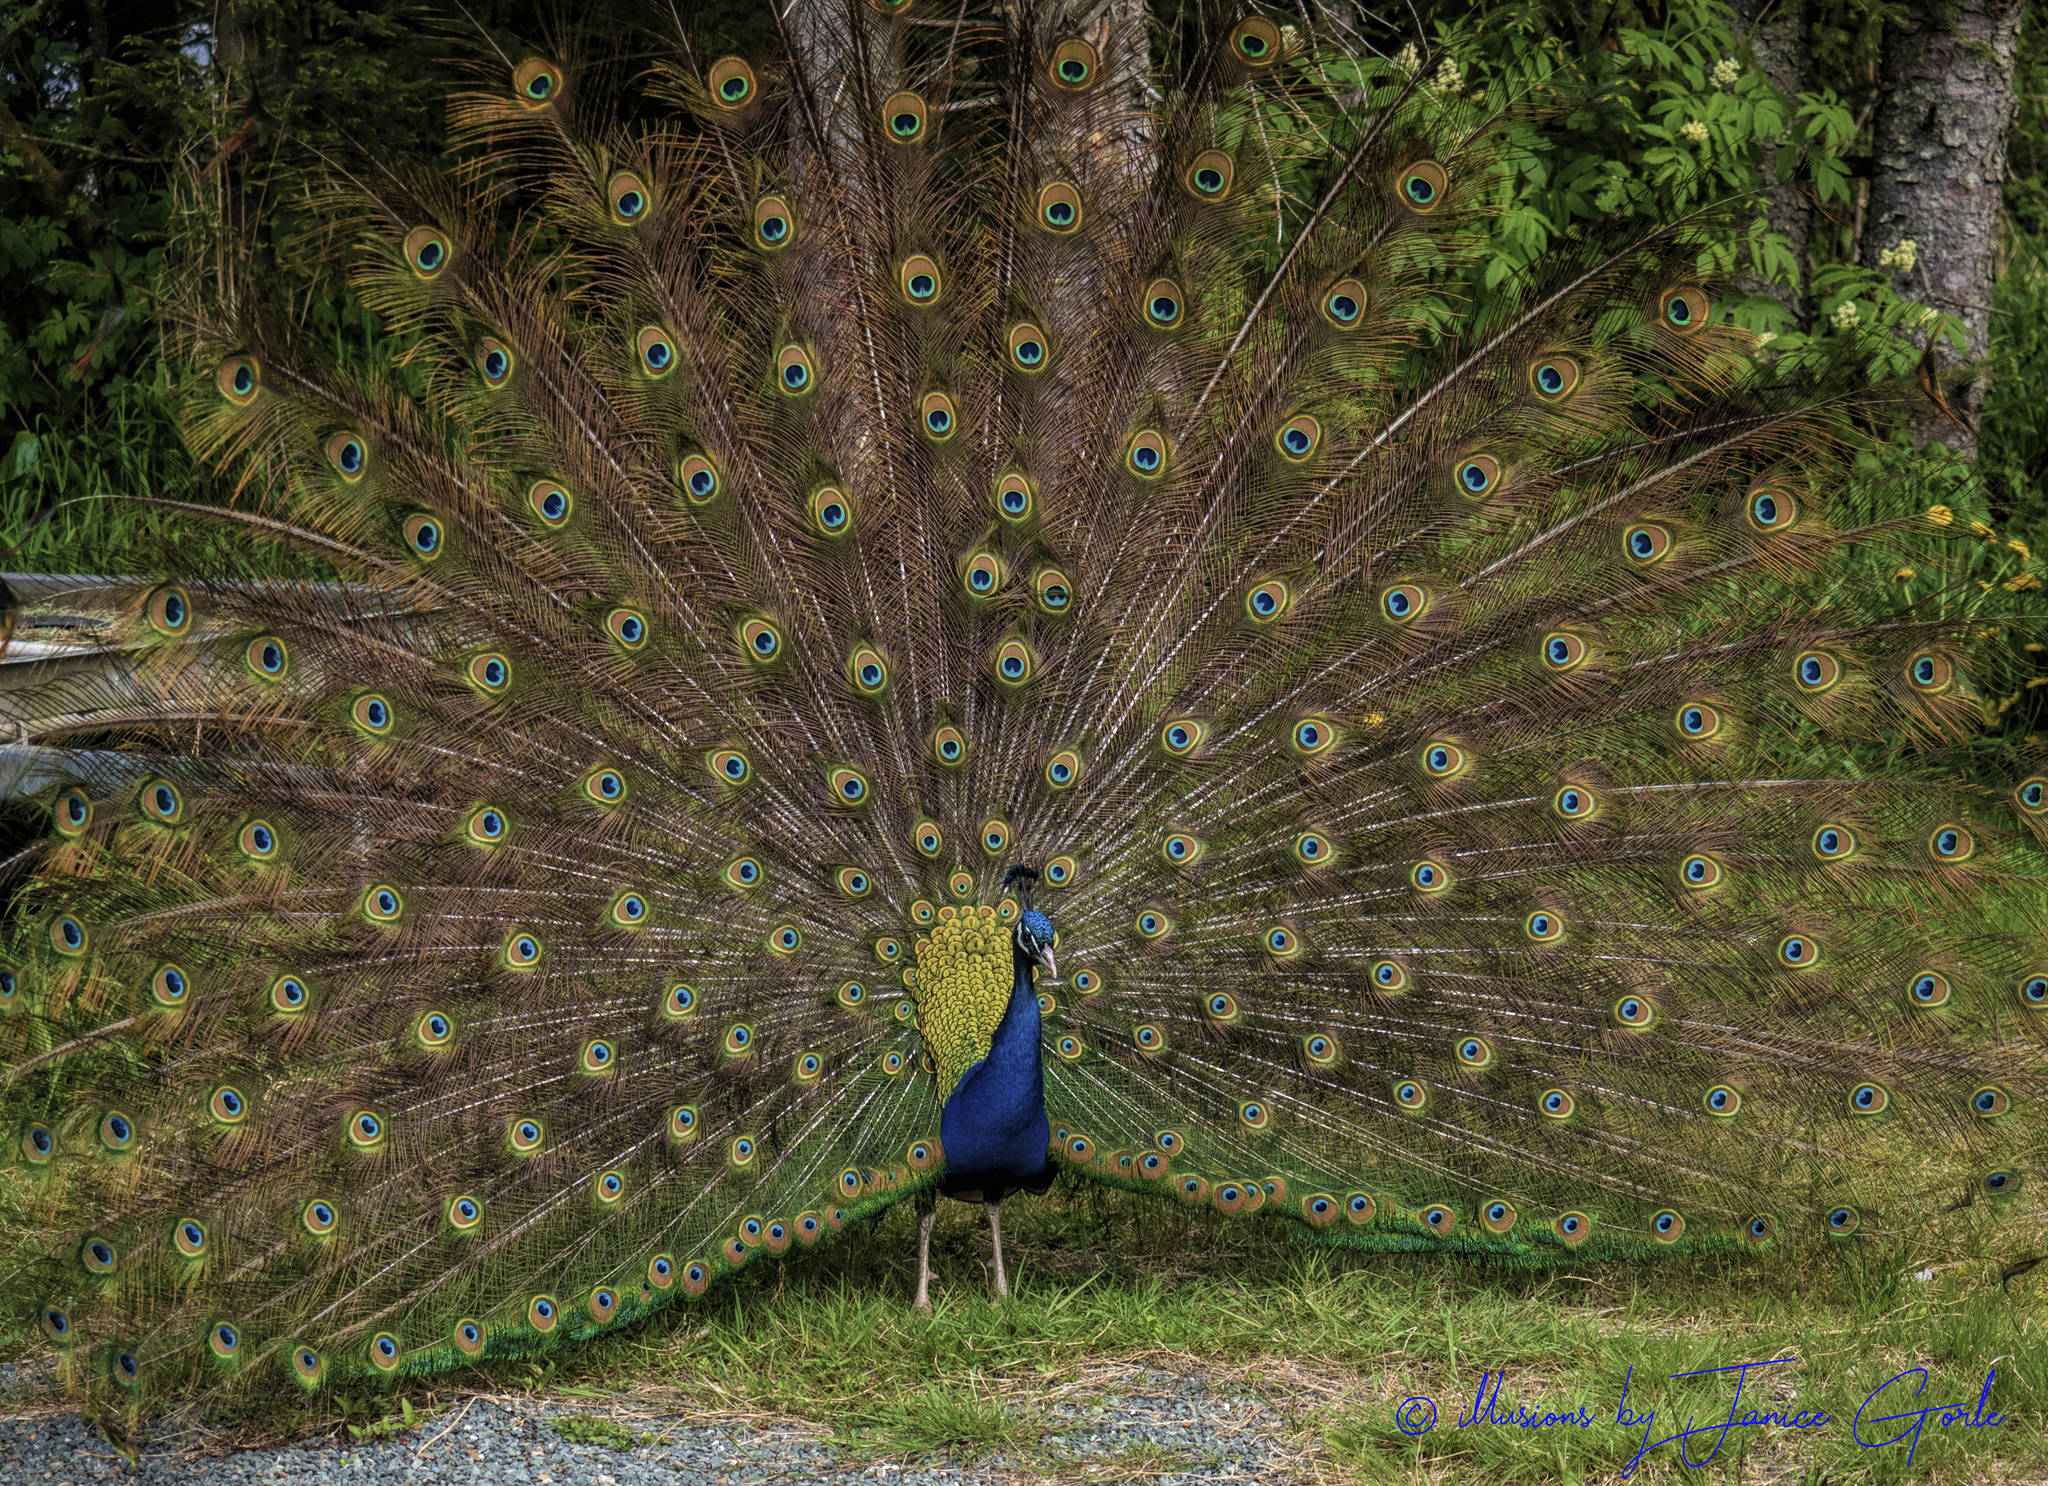 A peacock shows off its feathers at Swampy Acres on May 18, 2019. (Courtesy Photo | Janice Gorle)